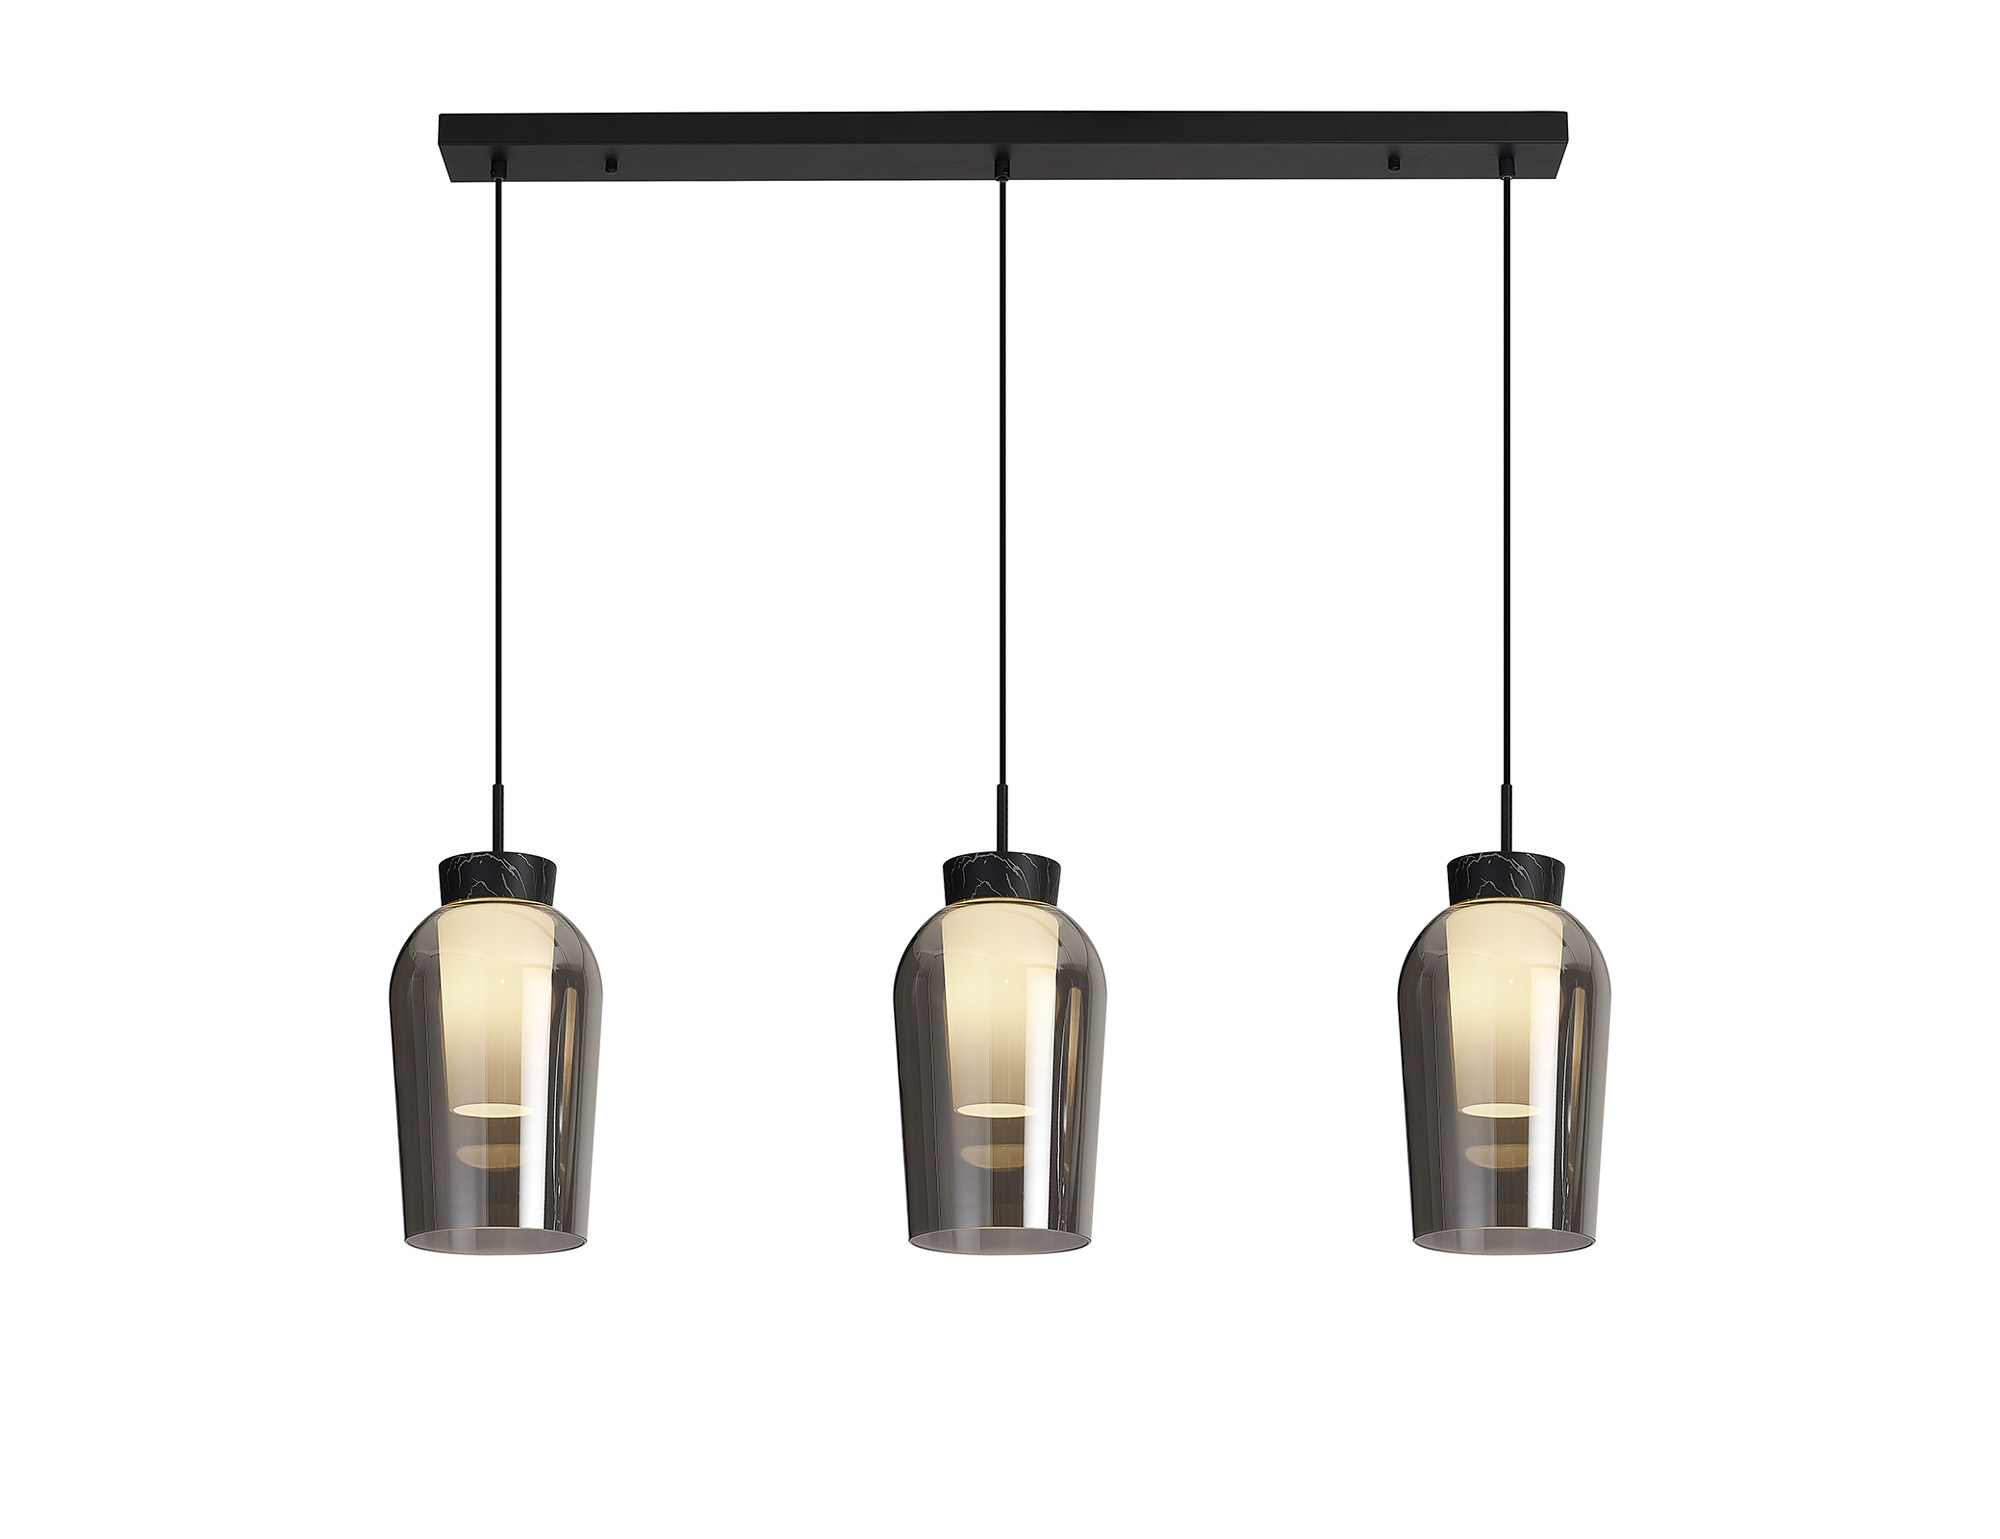 Nora Black Ceiling Lights Mantra Linear Fittings